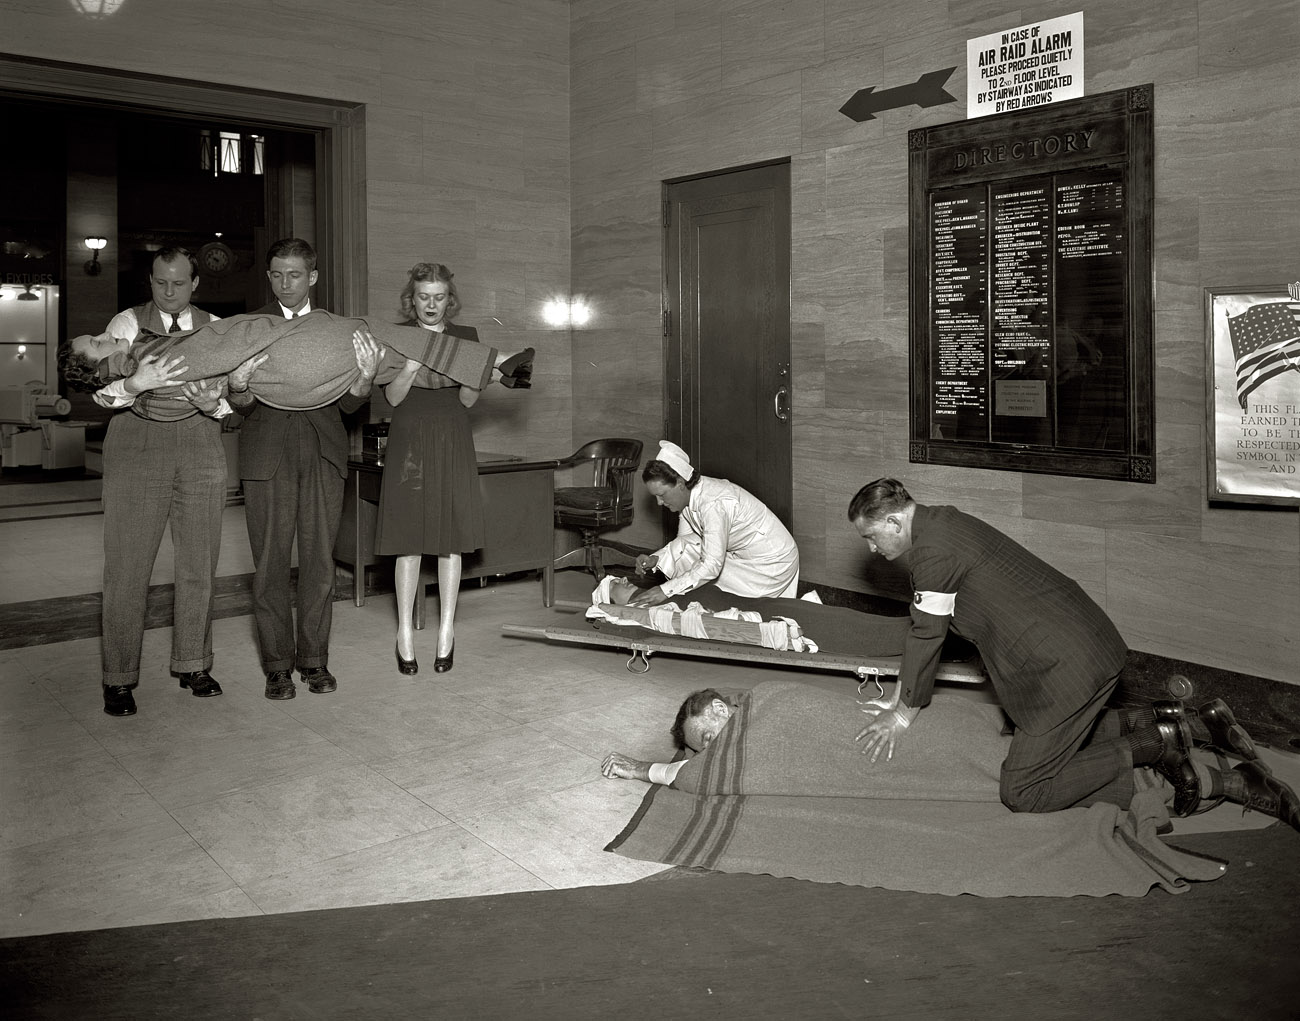 Washington circa 1942. "Potomac Electric Power Co. Building. Air raid equipment and personnel." View full size. 8x10 safety negative by Theodor Horydczak.